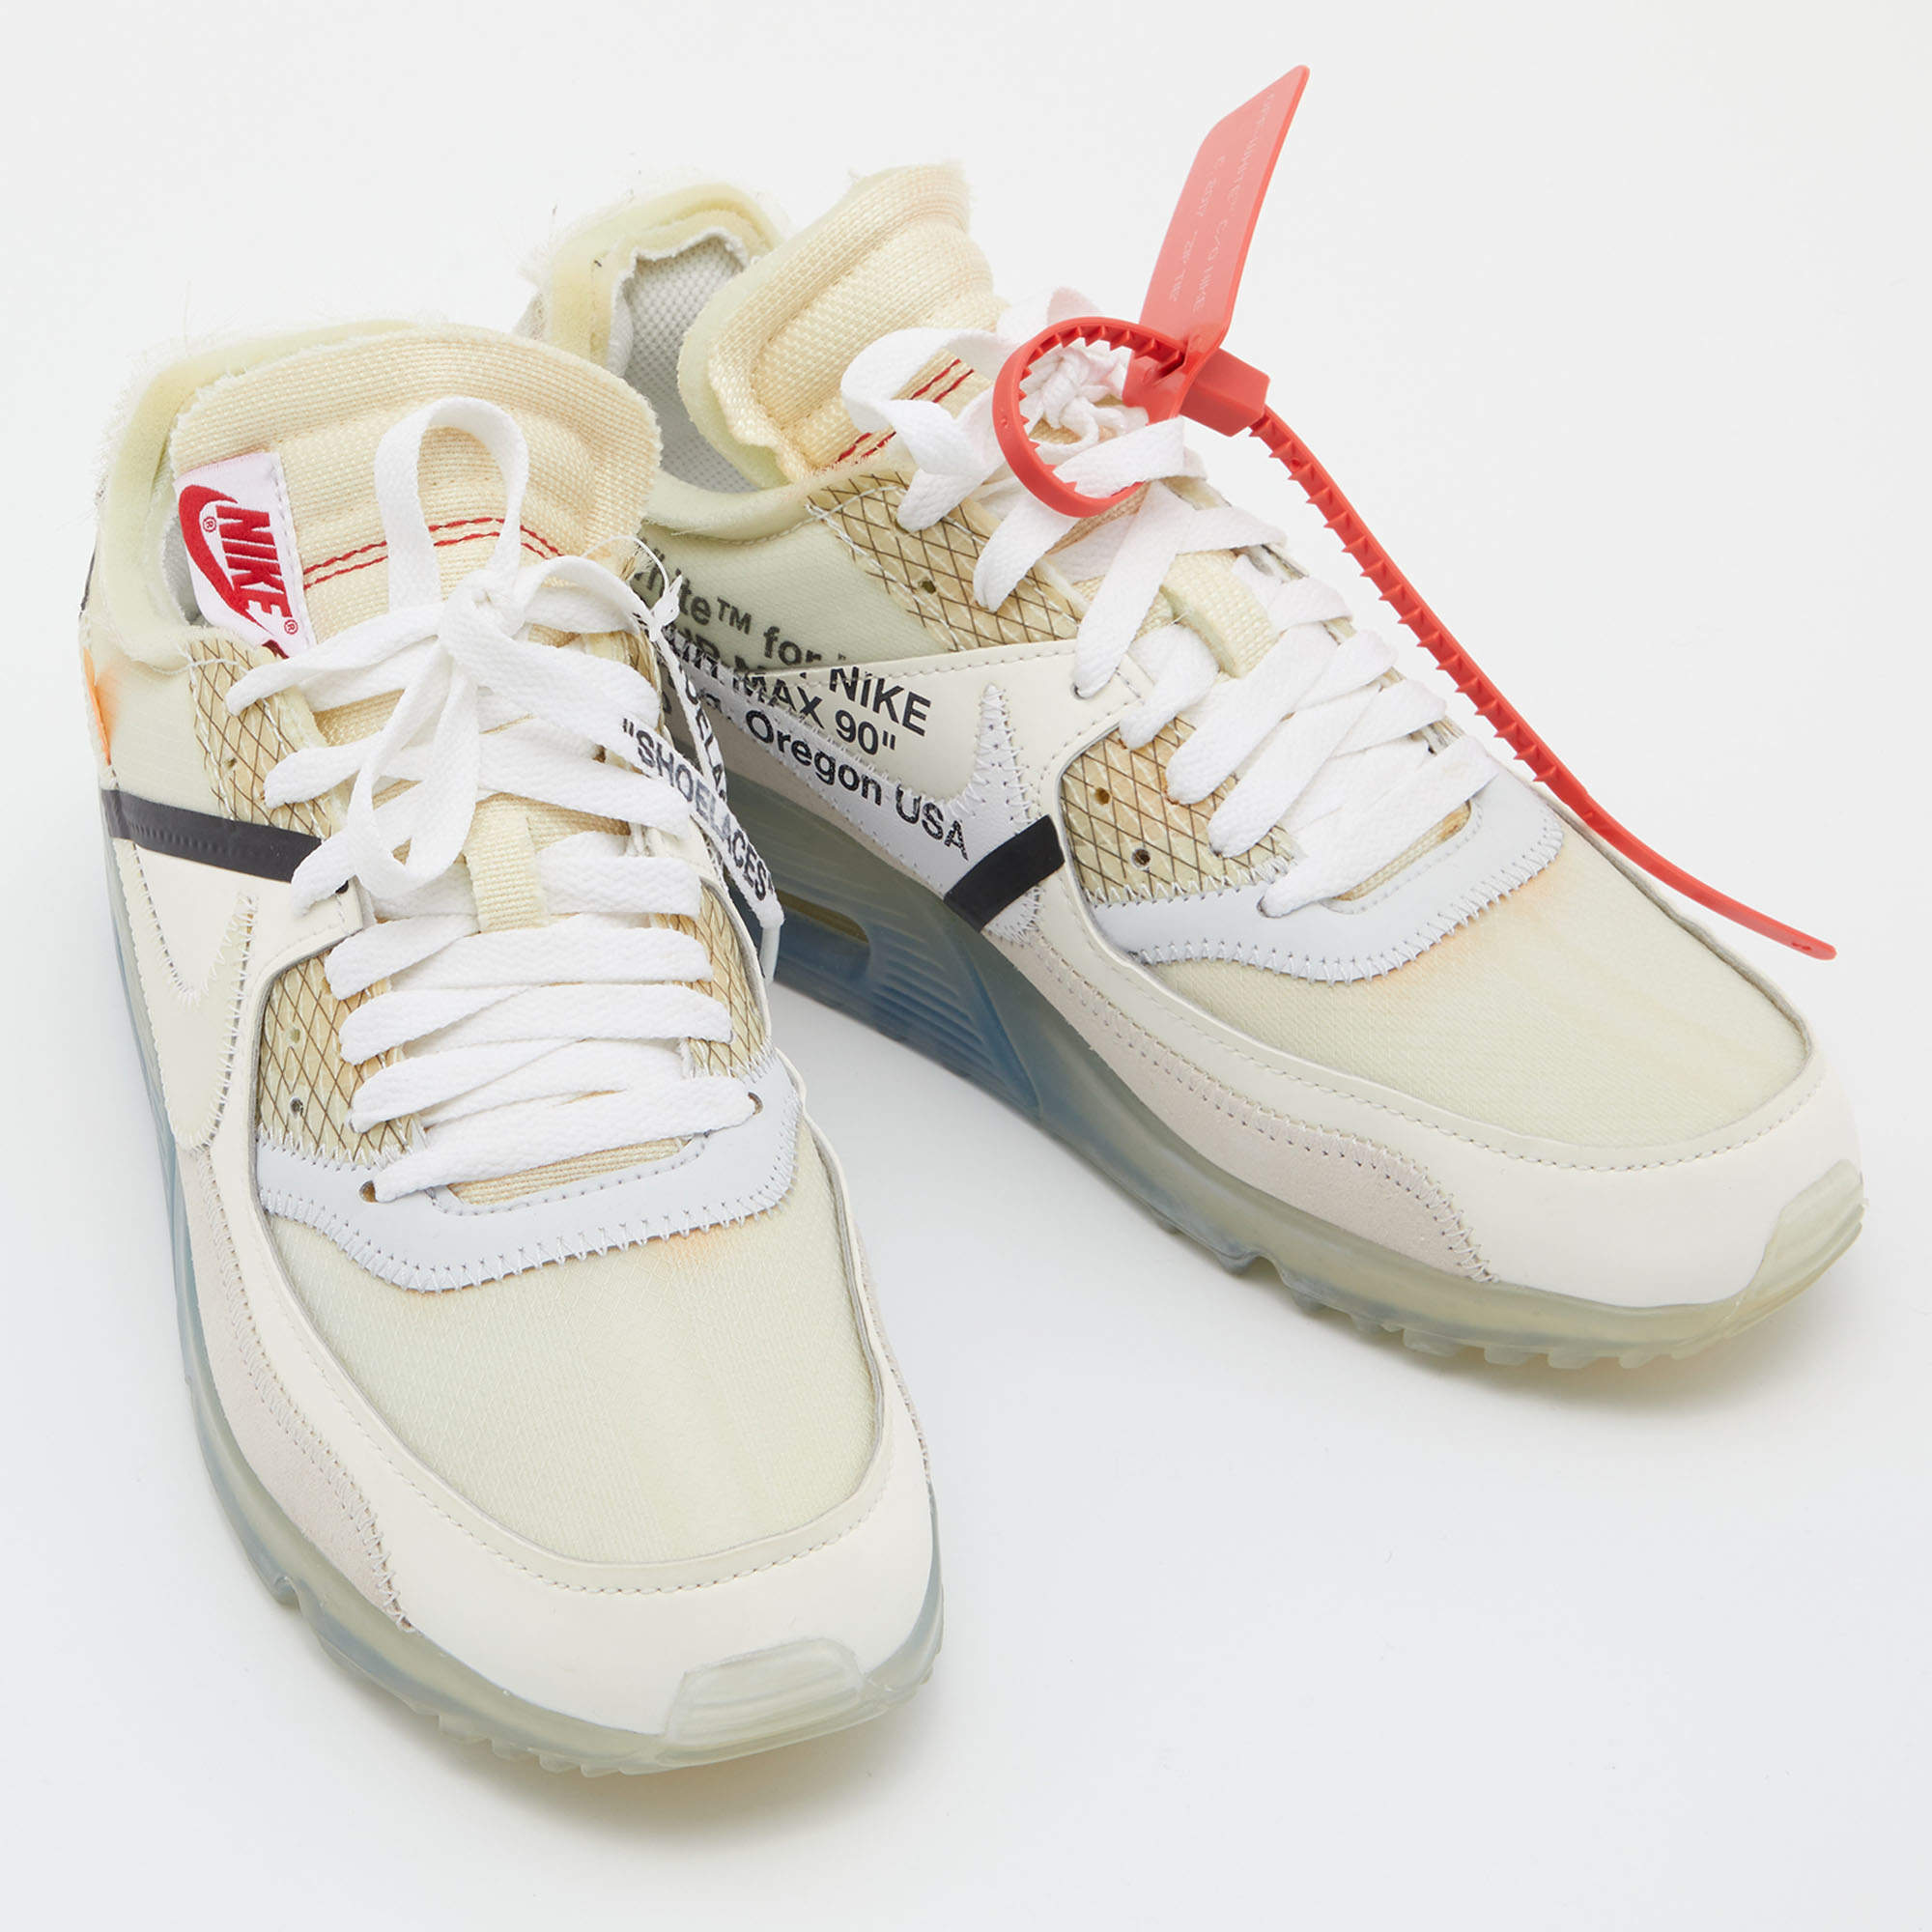 Off-White x Nike Off White Suede and Leather The 10 Air Max 90 Sneakers  Size 40